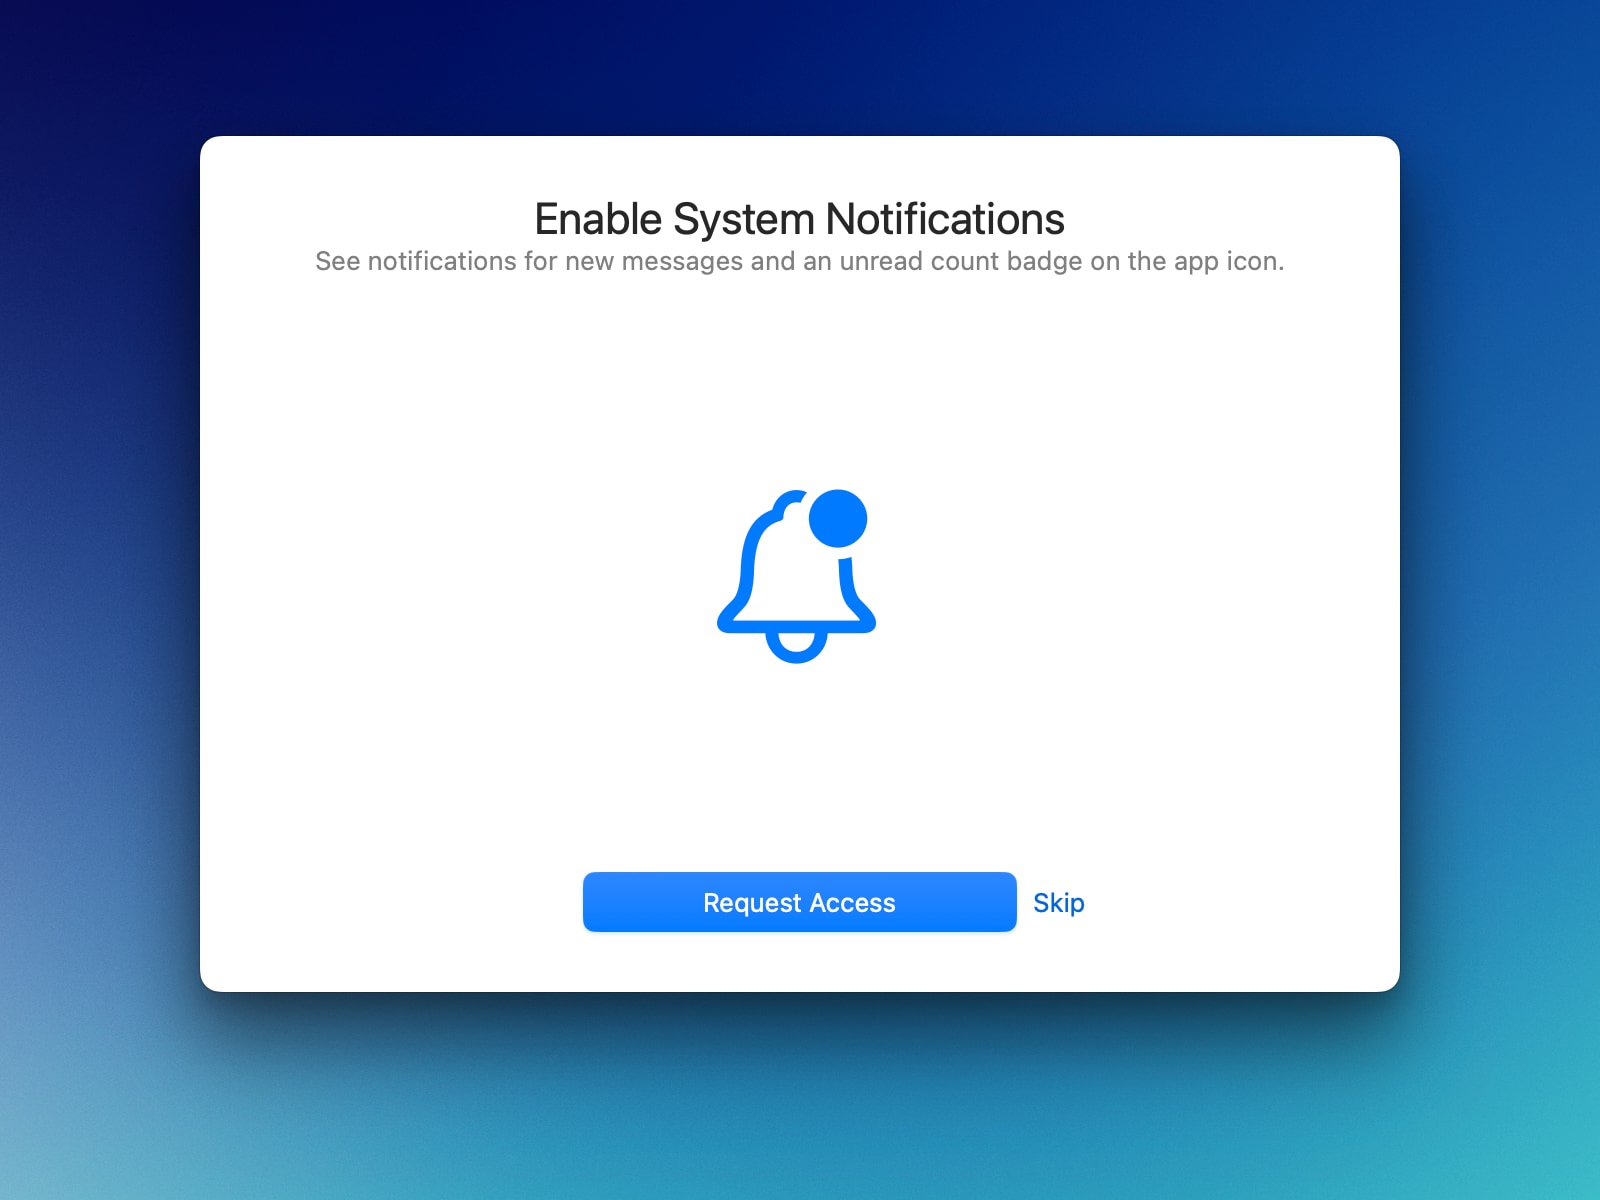 Enable System Notifications